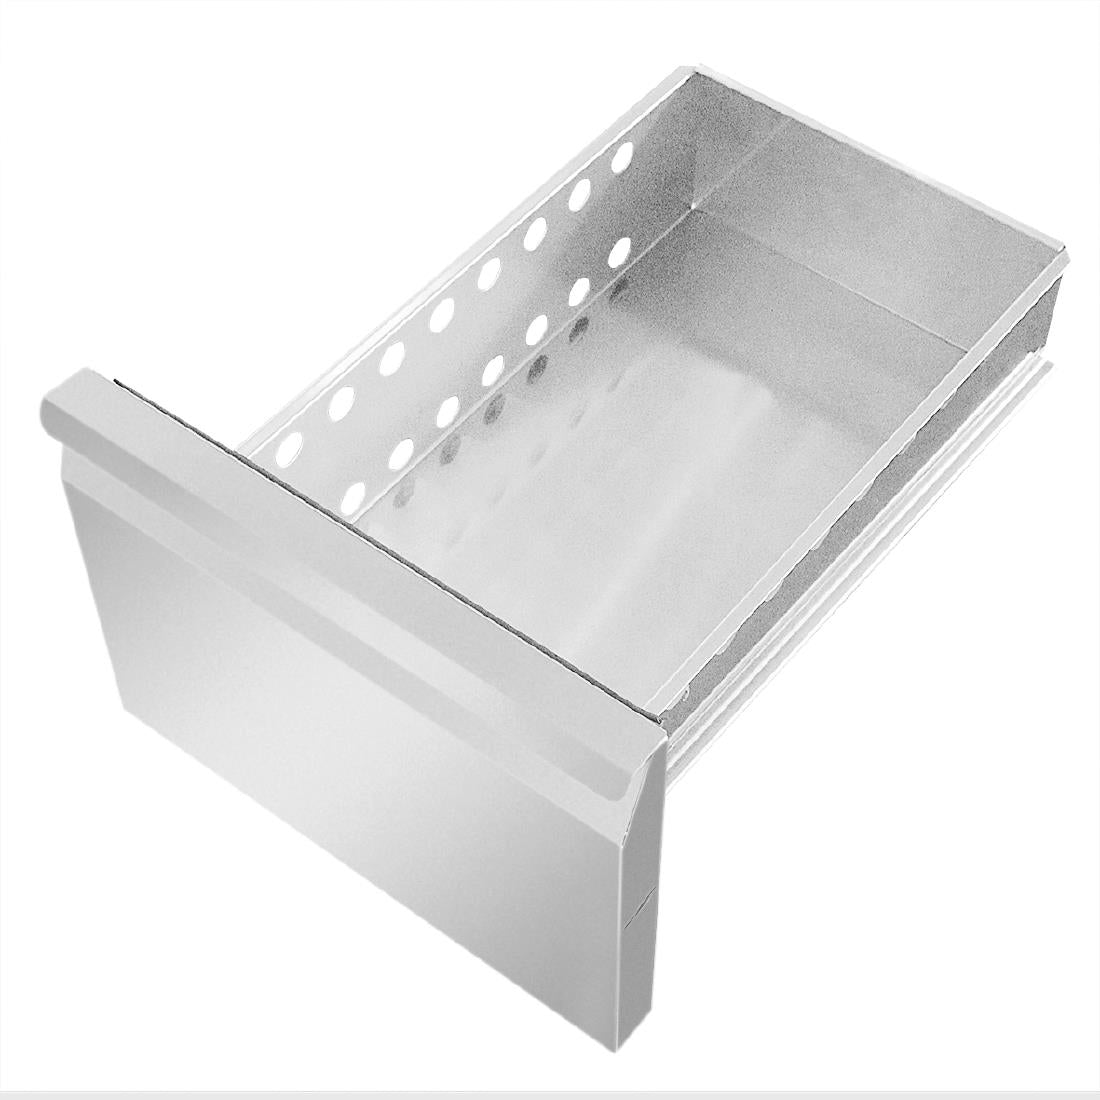 AK131 Polar Drawer with Welded Handle JD Catering Equipment Solutions Ltd